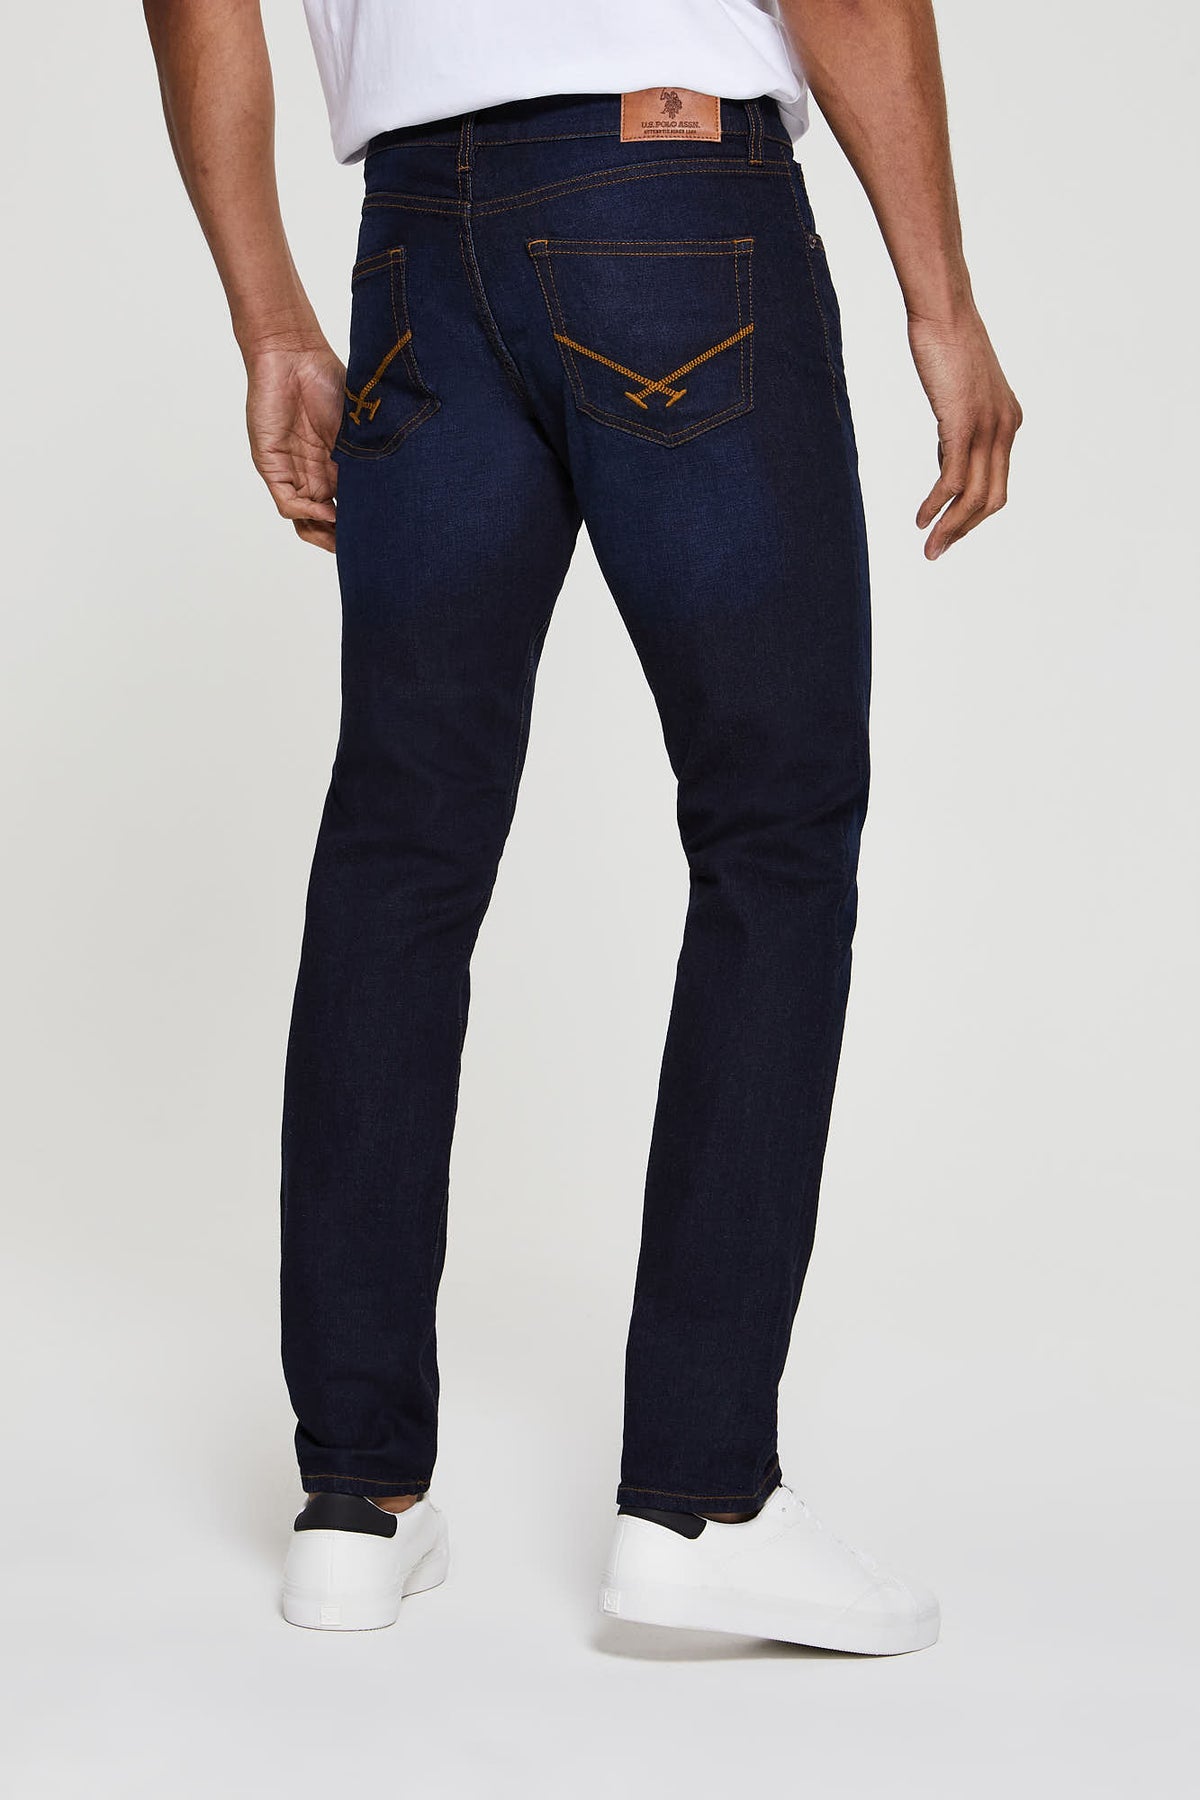 U.S. Polo Assn Jeans & Trousers Collections